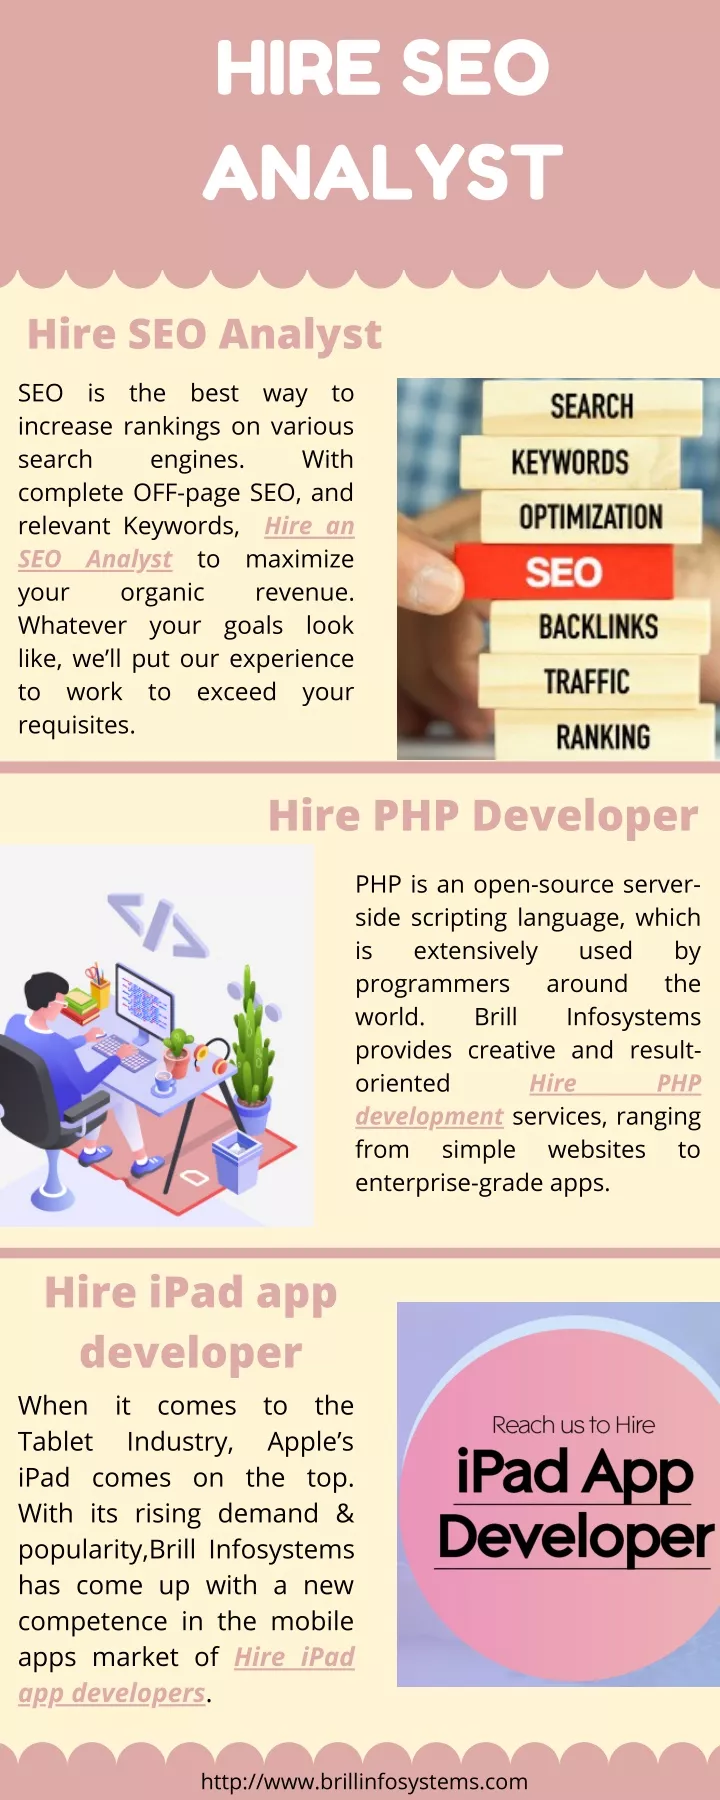 hire seo analyst hire seo analyst increase